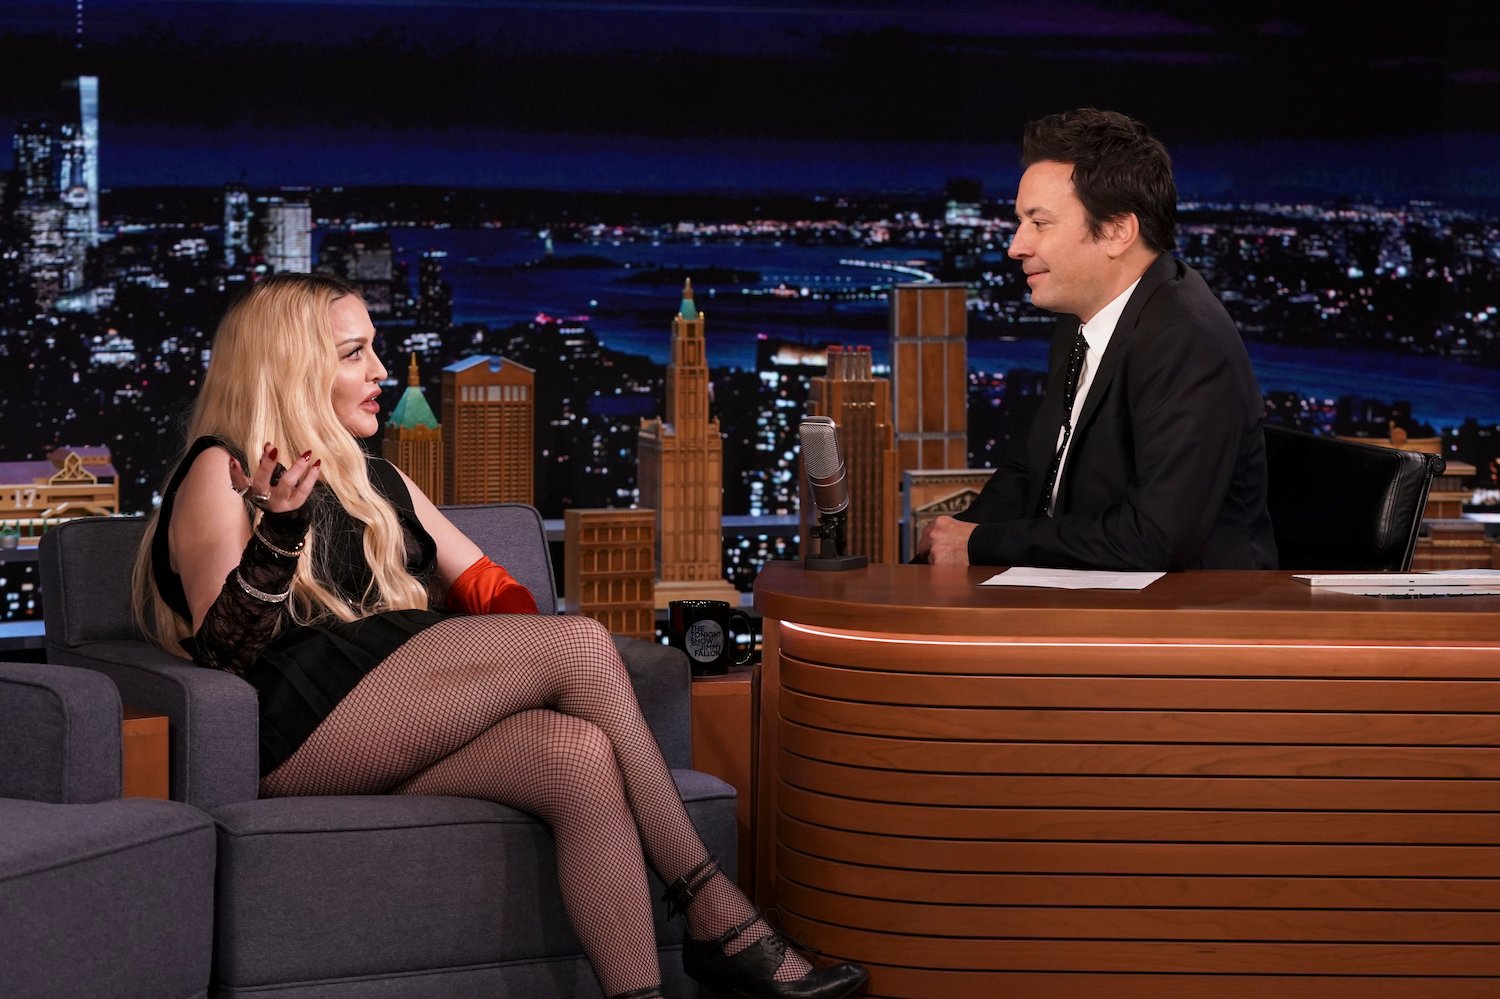 Madonna wears all black and one red glove during an interview with Jimmy Fallon on 'The Tonight Show' Starring Jimmy Fallon'